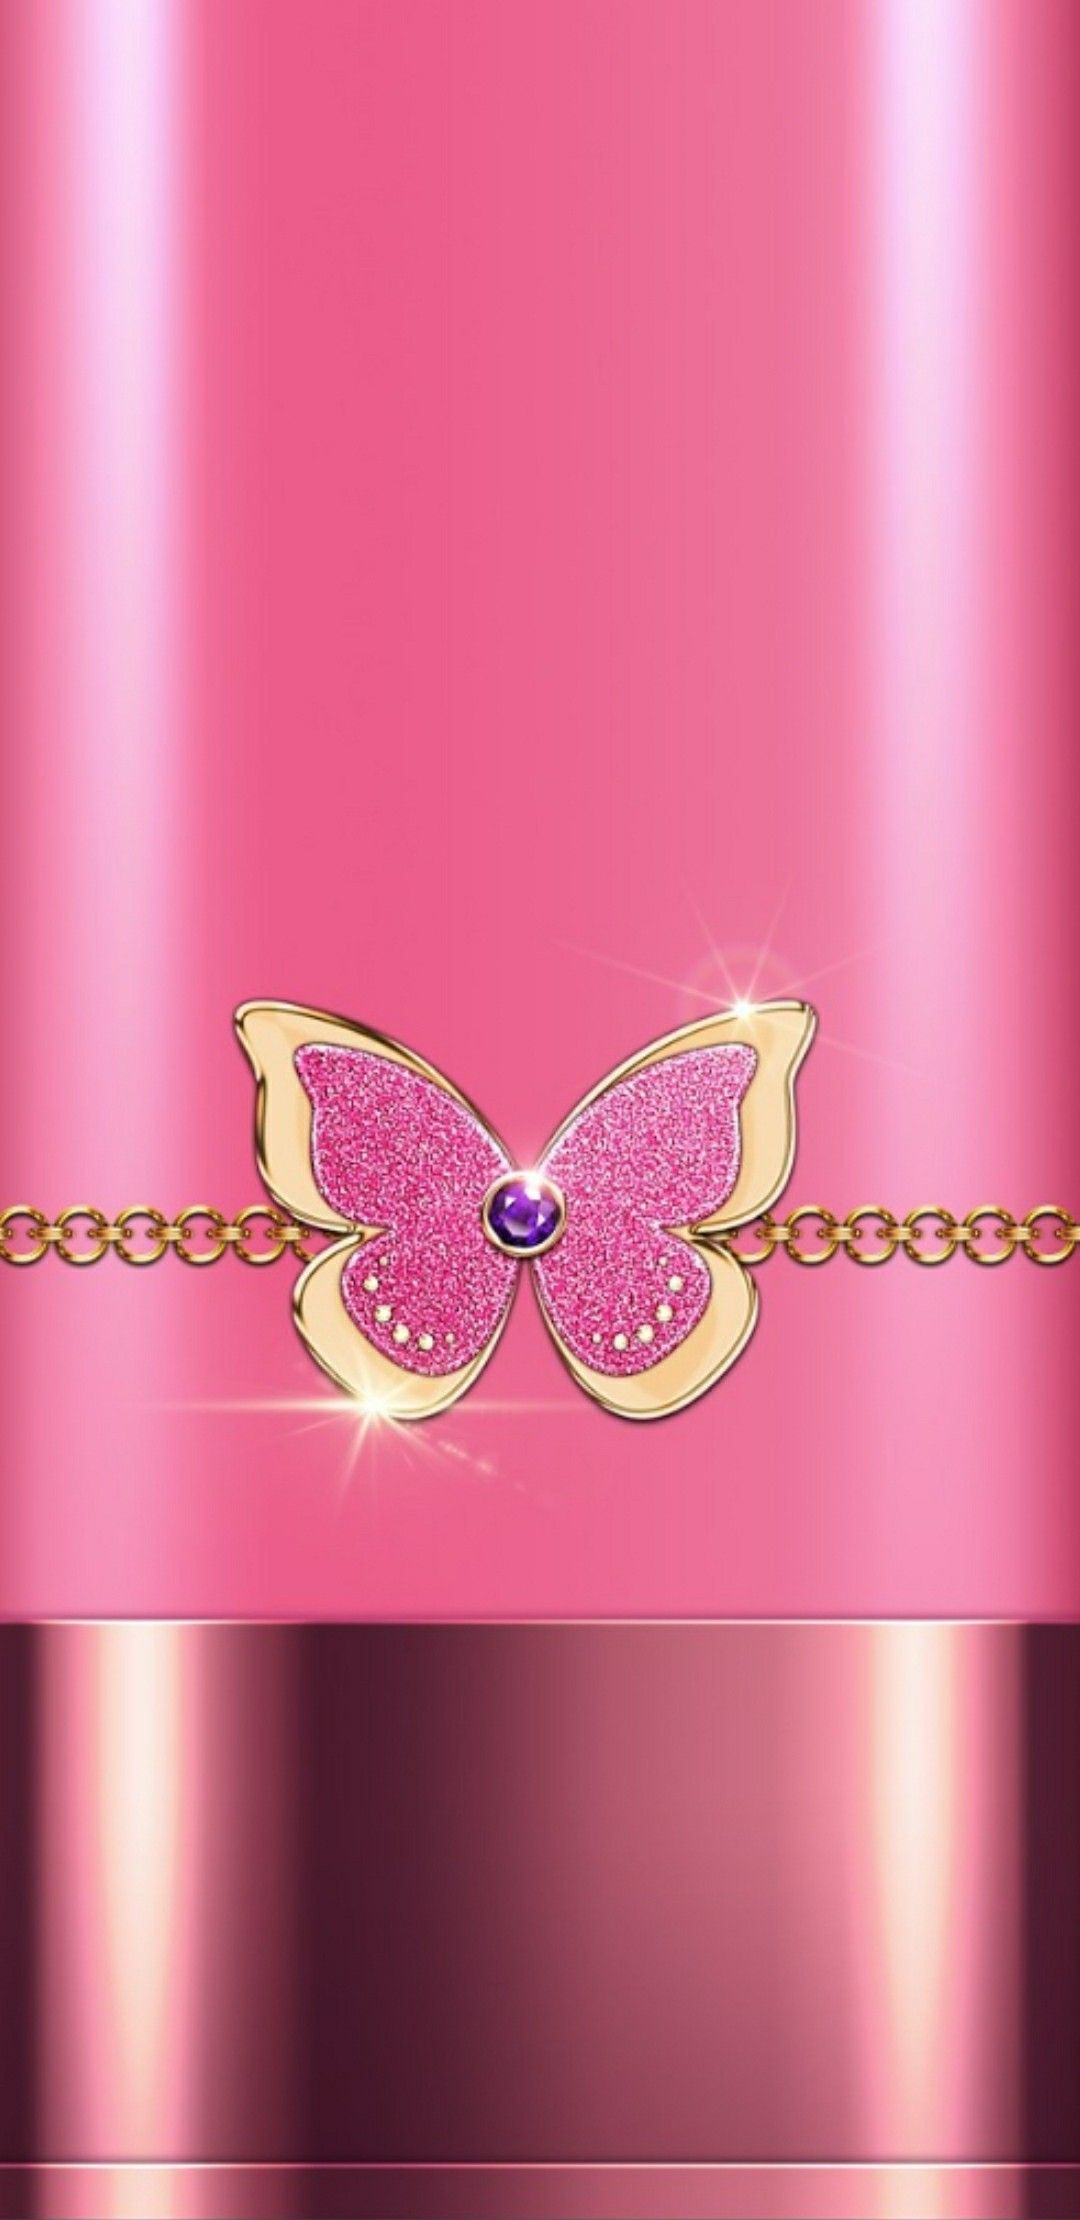 1080x2220 pink butterfly phone wallpaper&eth;&#159;&#146;&#150; | Bling wallpaper, Butterfly wallpaper, Cellphone wallpaper